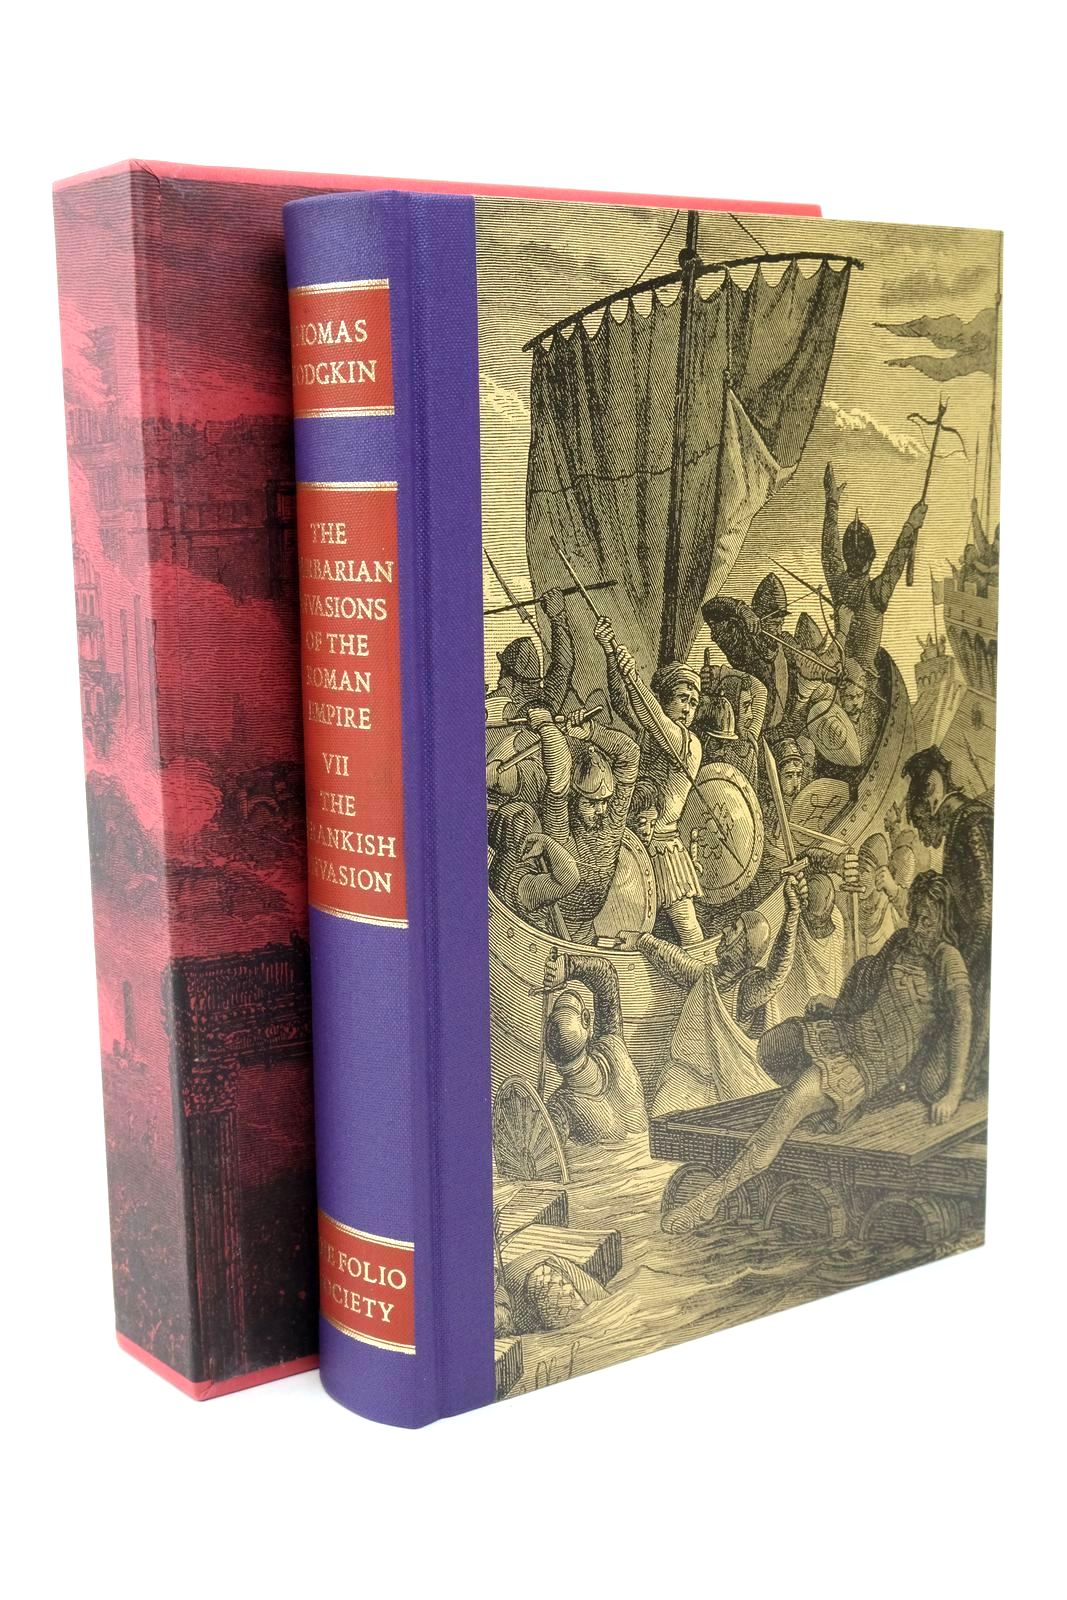 Photo of THE BARBARIAN INVASIONS OF THE ROMAN EMPIRE VOLUME VII THE FRANKISH EMPIRE 774-814 written by Hodgkin, Thomas Heather, Peter published by Folio Society (STOCK CODE: 1322520)  for sale by Stella & Rose's Books